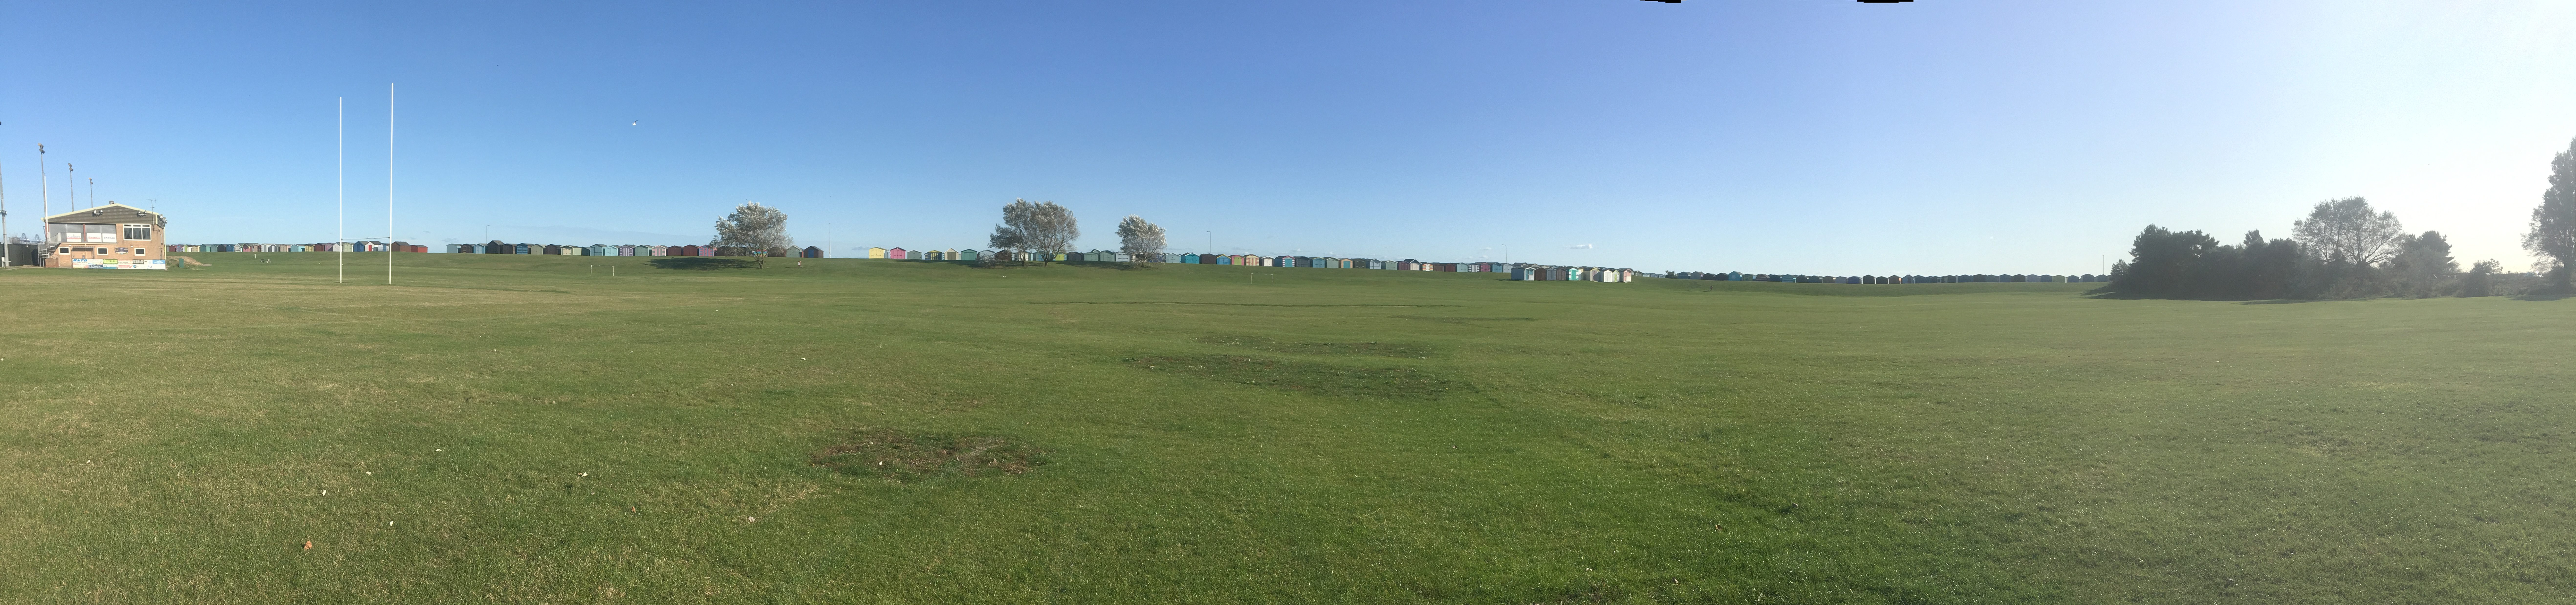 Beach huts surrounding the playing fields at Harwich